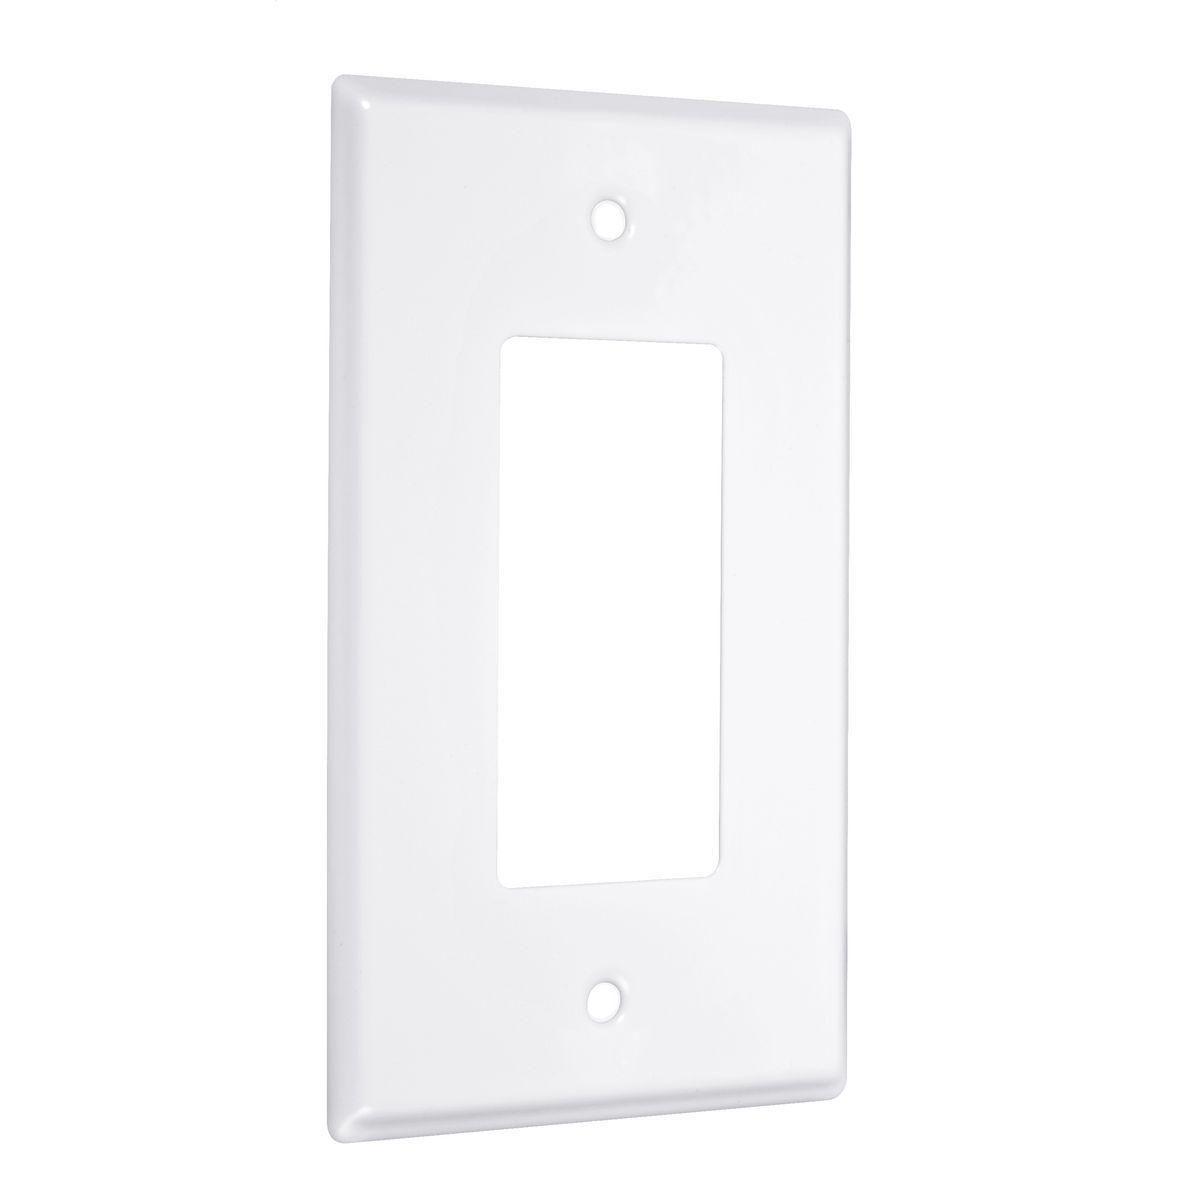 Hubbell WJW-R 1-Gang Metal Wallplate, Jumbo, Decorator, White Smooth  ; Easily primed and painted to match or complement walls. ; Won't bow, crack or distort during installation. ; Premium North American powder coat. ; Includes screw(s) in matching finish.